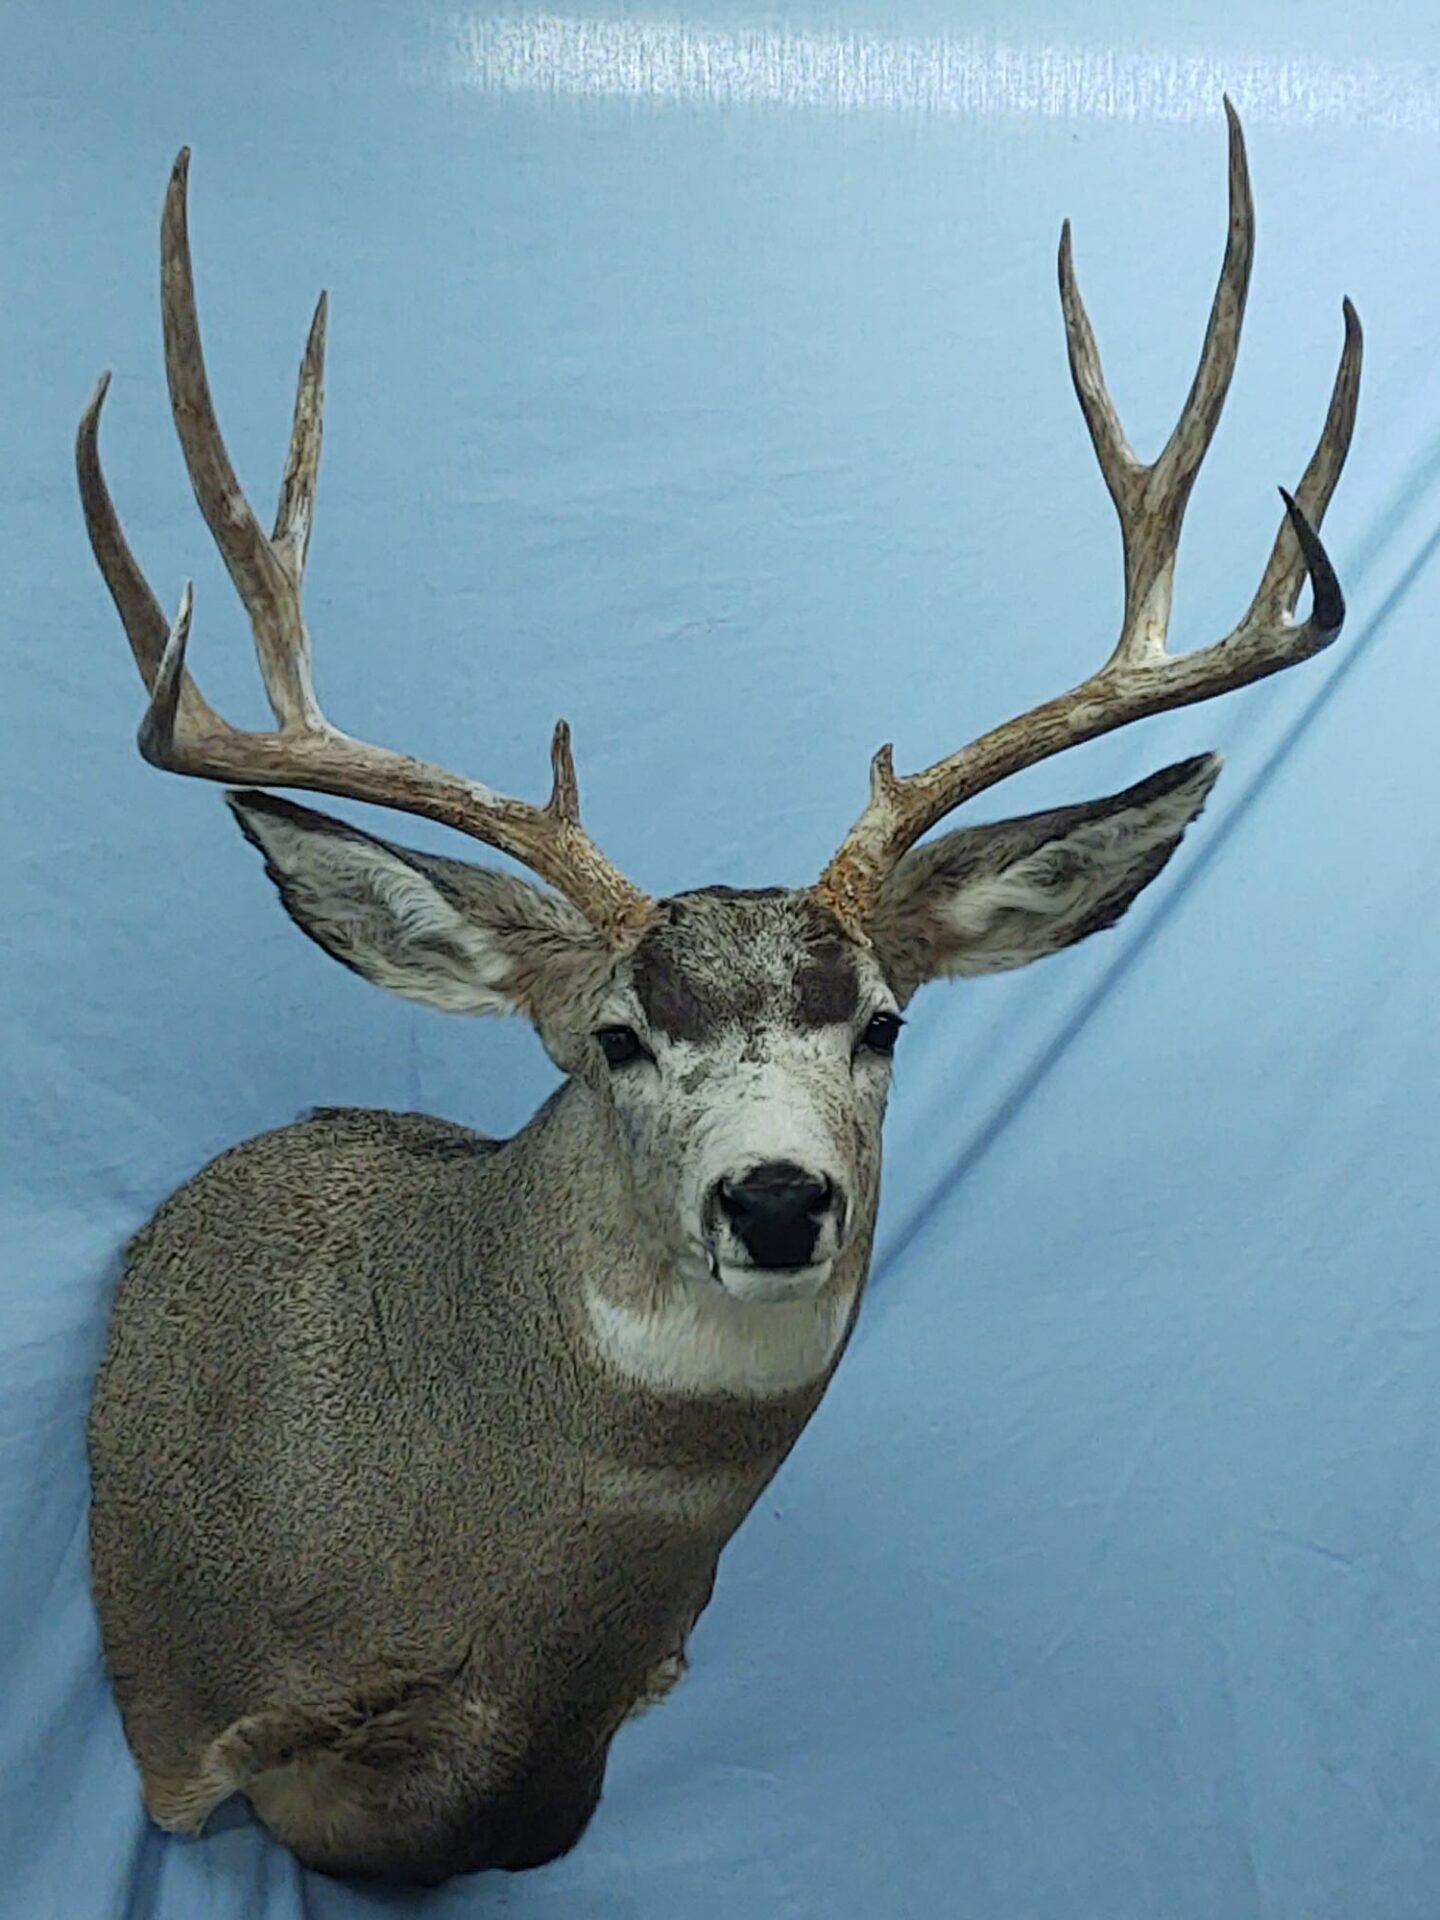 The front look of a regal deer taxidermy at the gallery